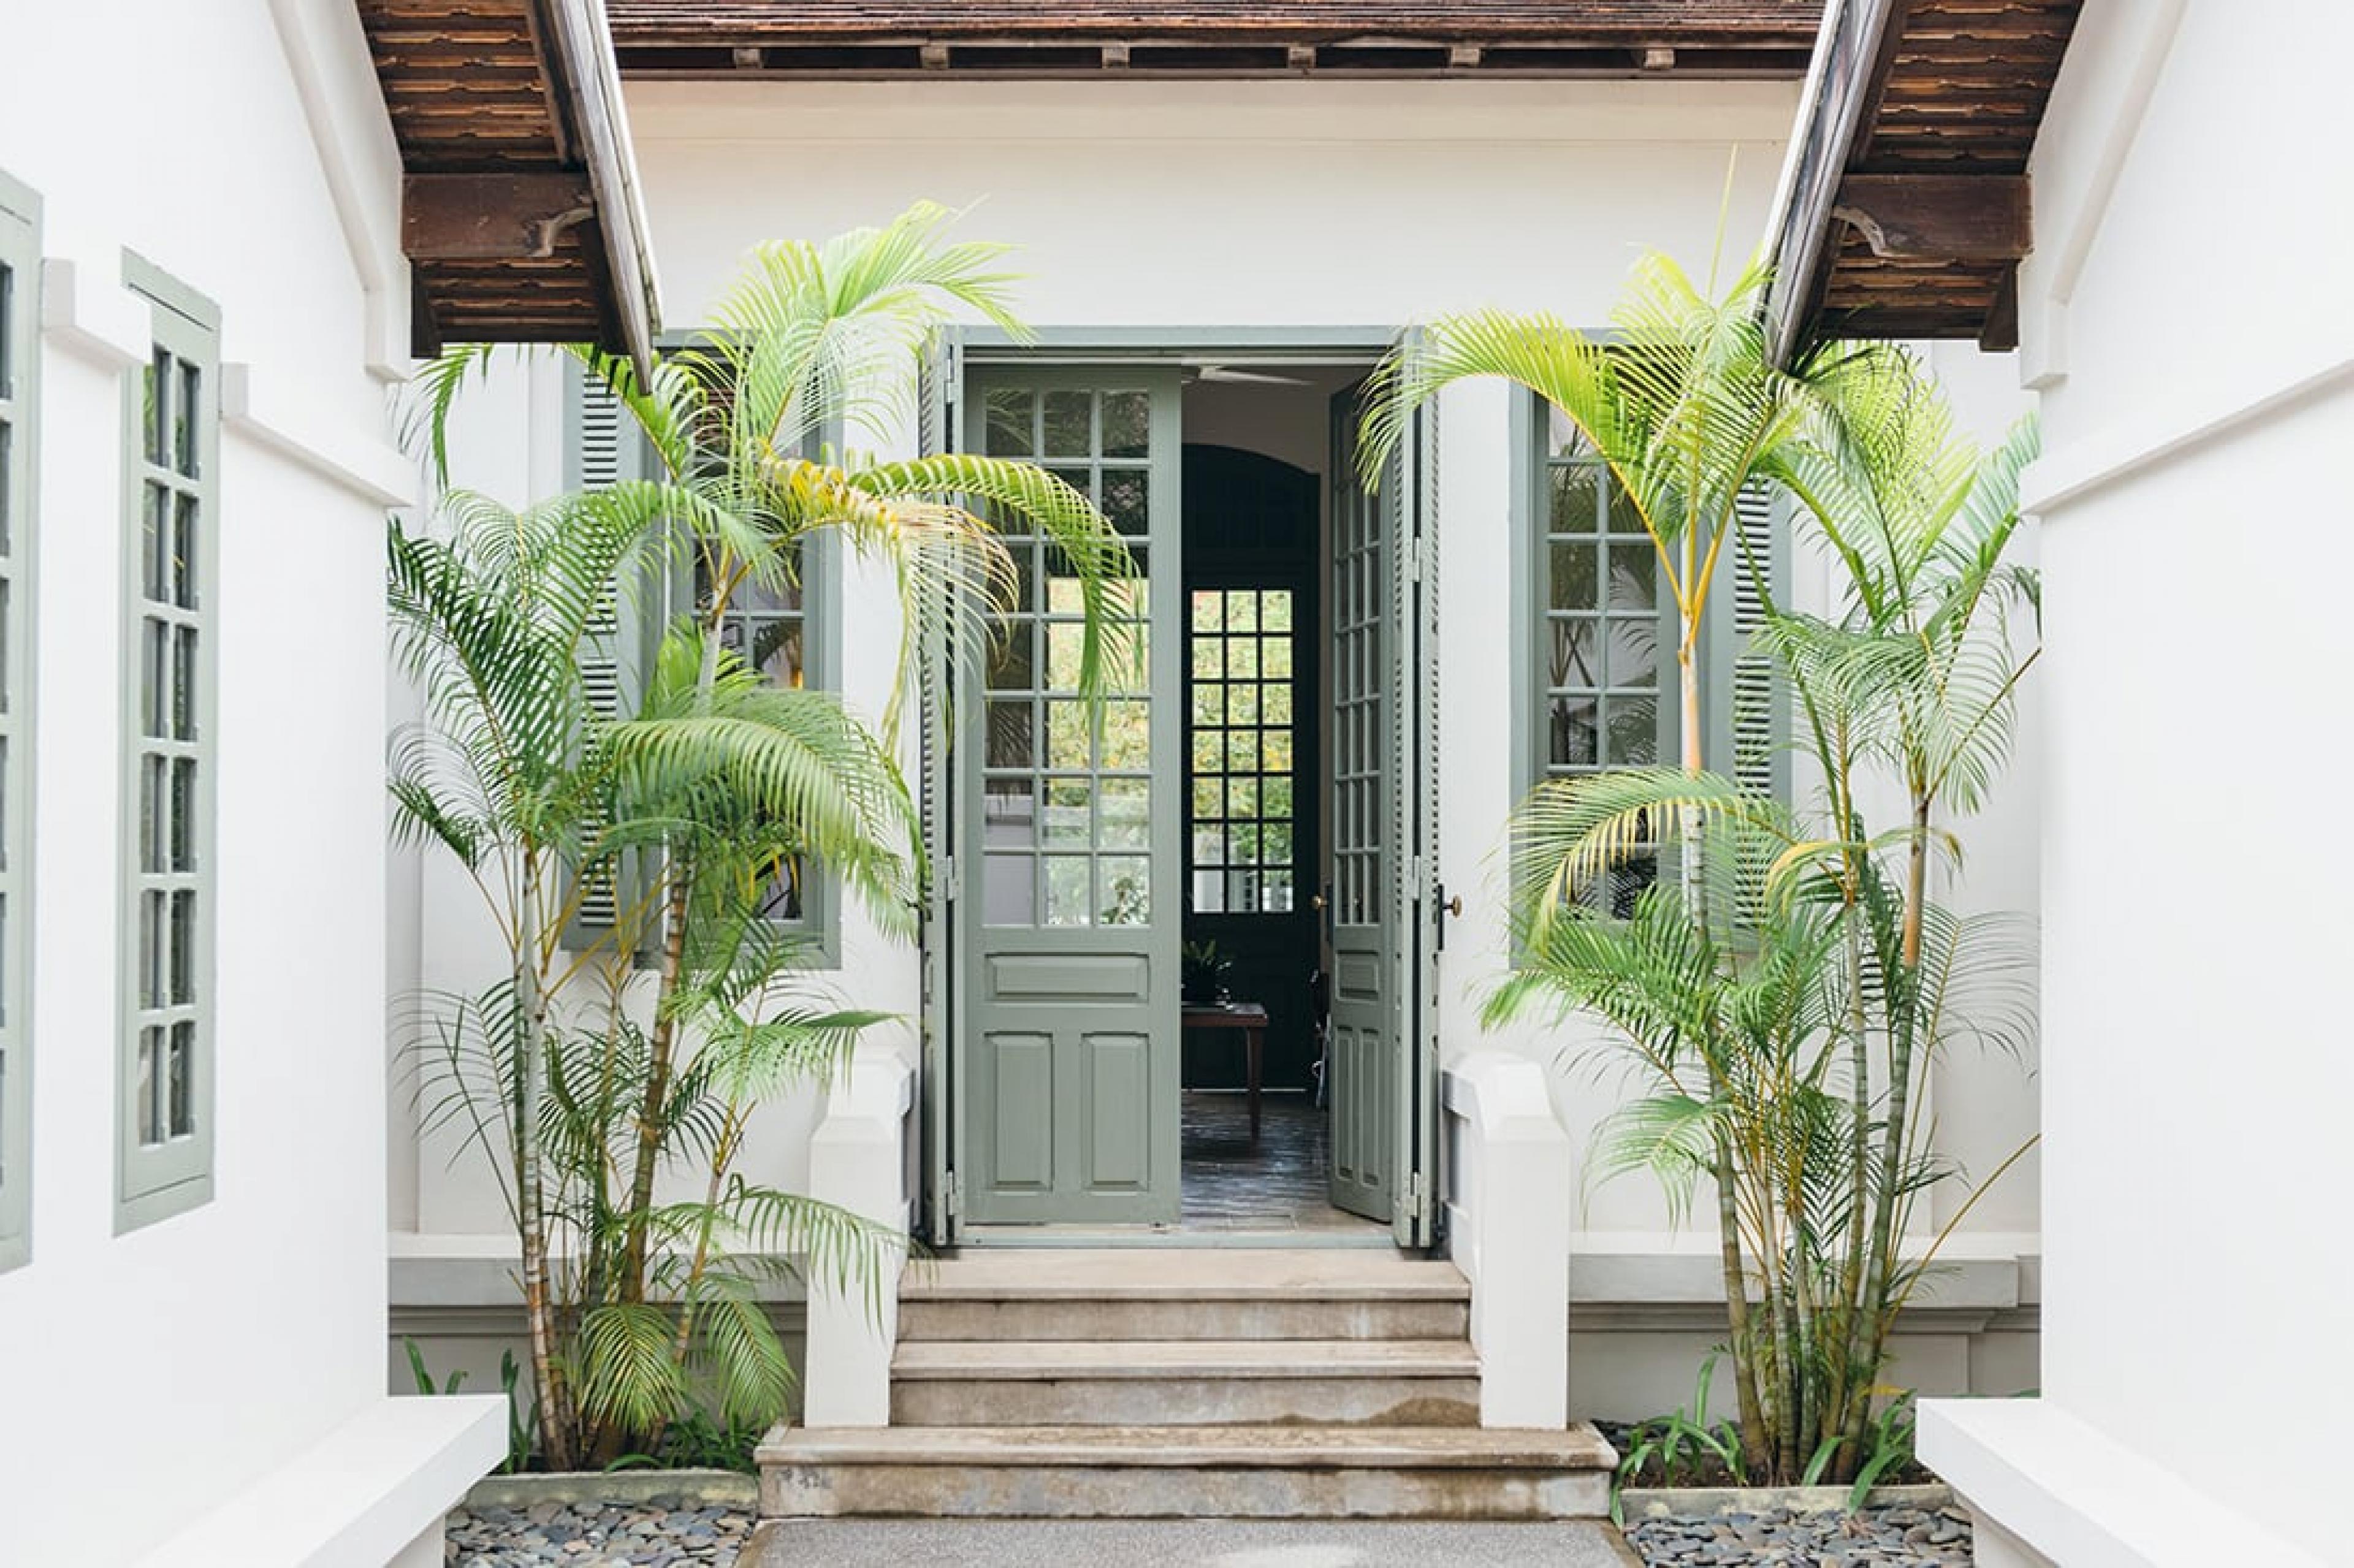 gray-teal french doors in a white villa exterior flanked by two potted palms